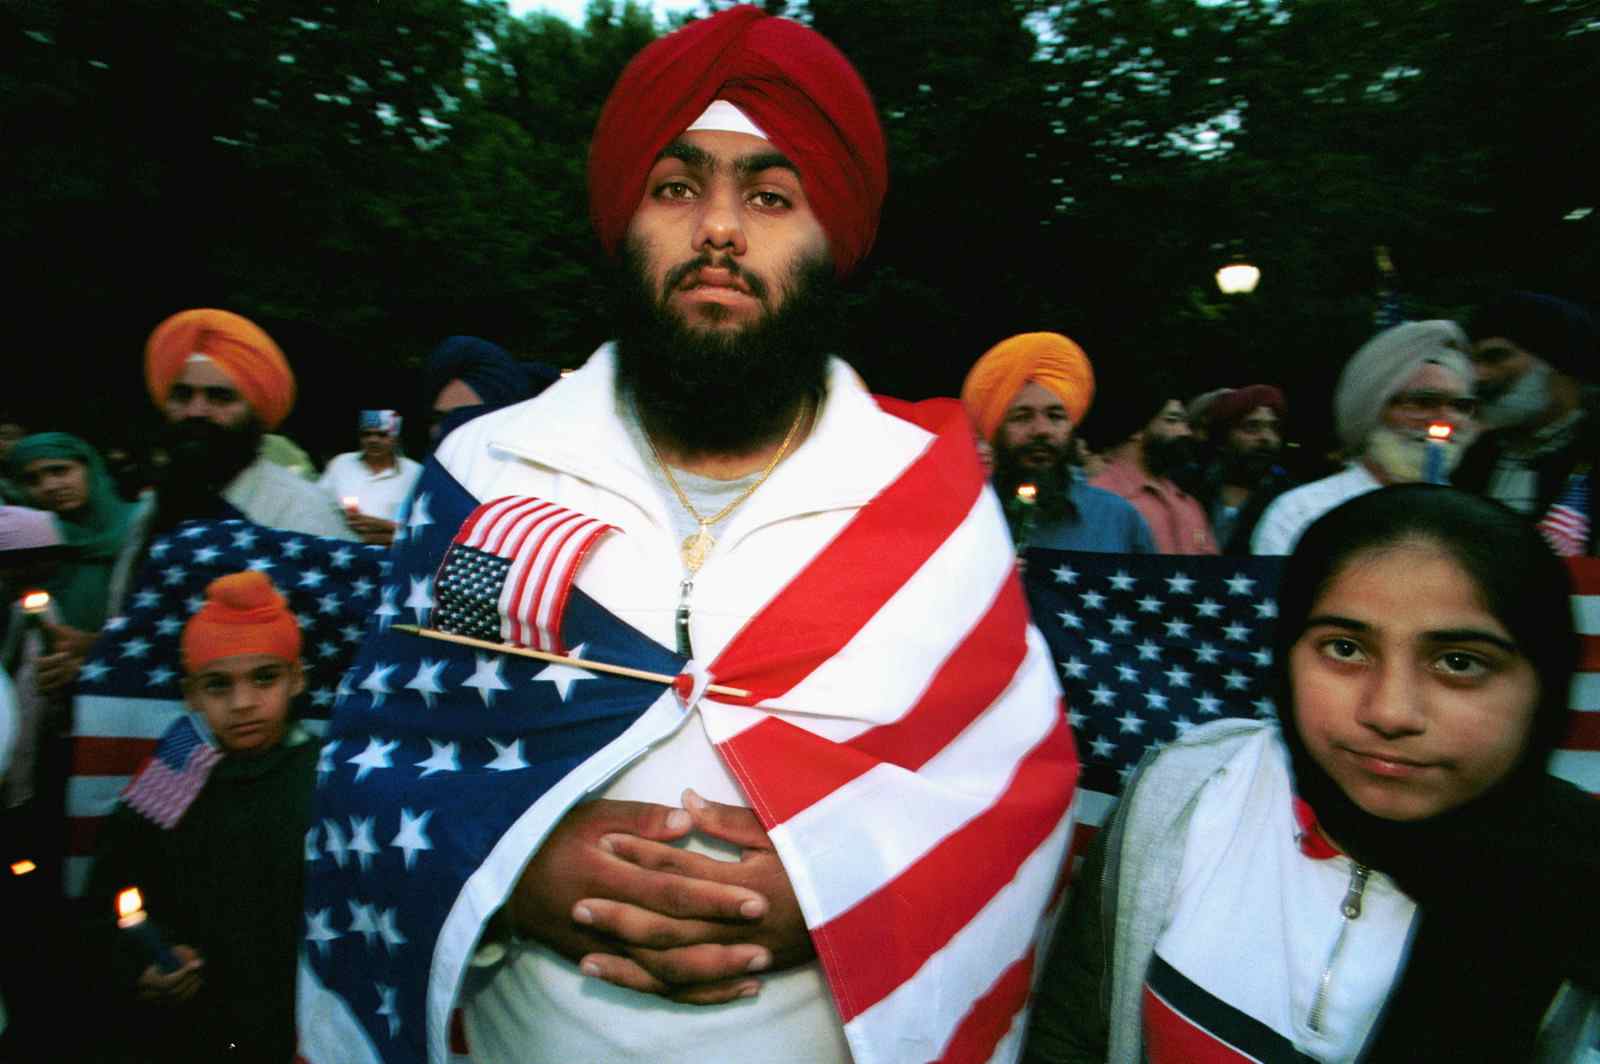 A Sikh wrapped in an American flag attends a candlelight vigil for victims of the World Trade Center attacks September 15, 2001 in Central Park in New York City (Robert Nickelsberg/Getty Images)